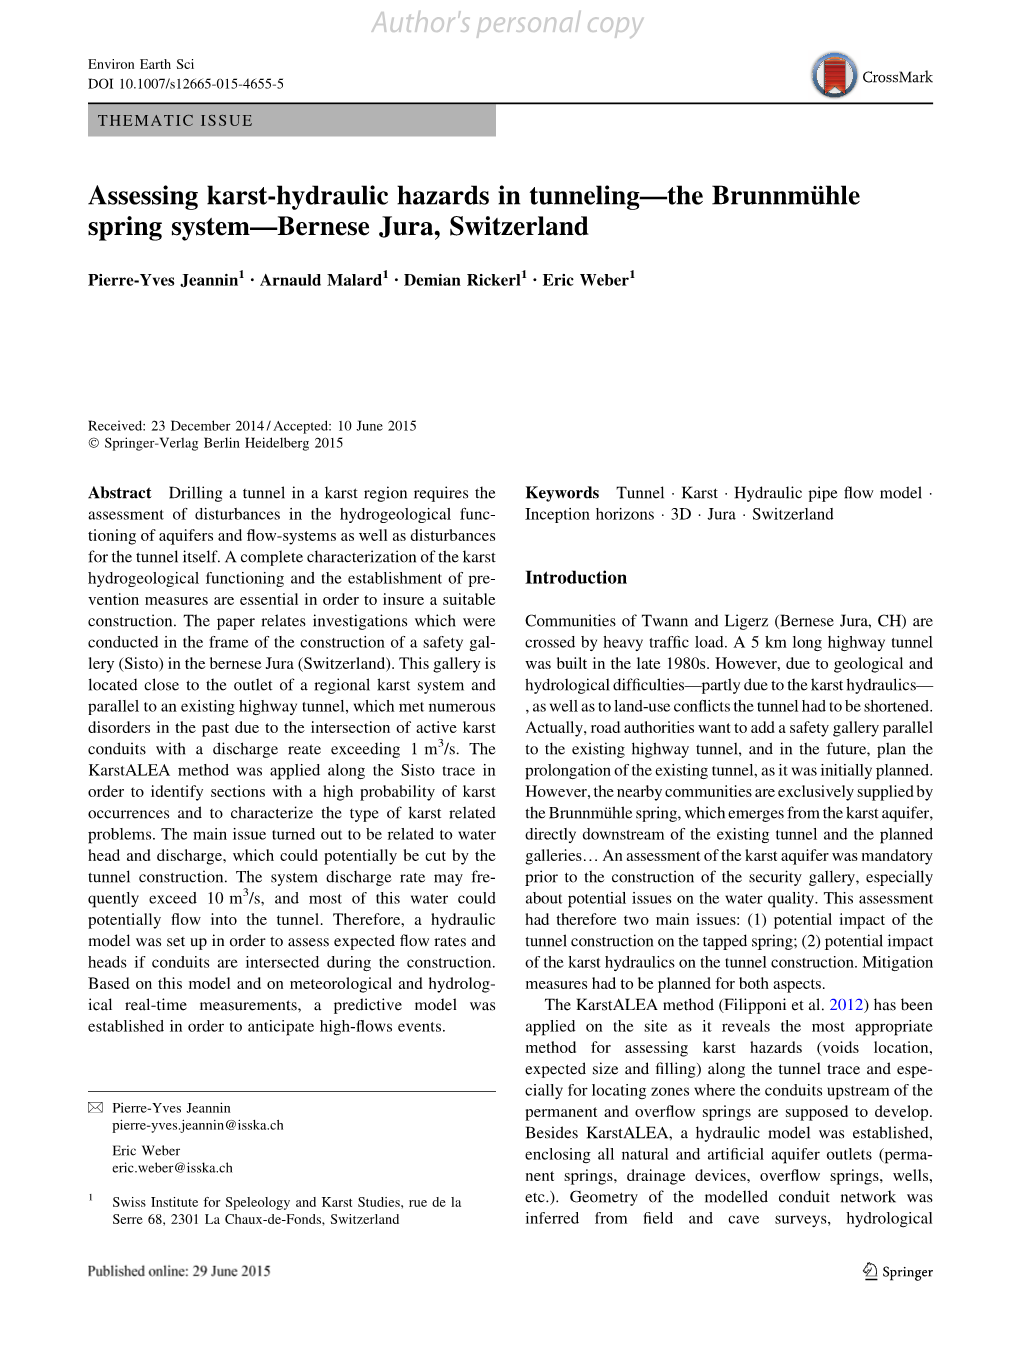 Assessing Karst-Hydraulic Hazards in Tunneling—The Brunnmühle